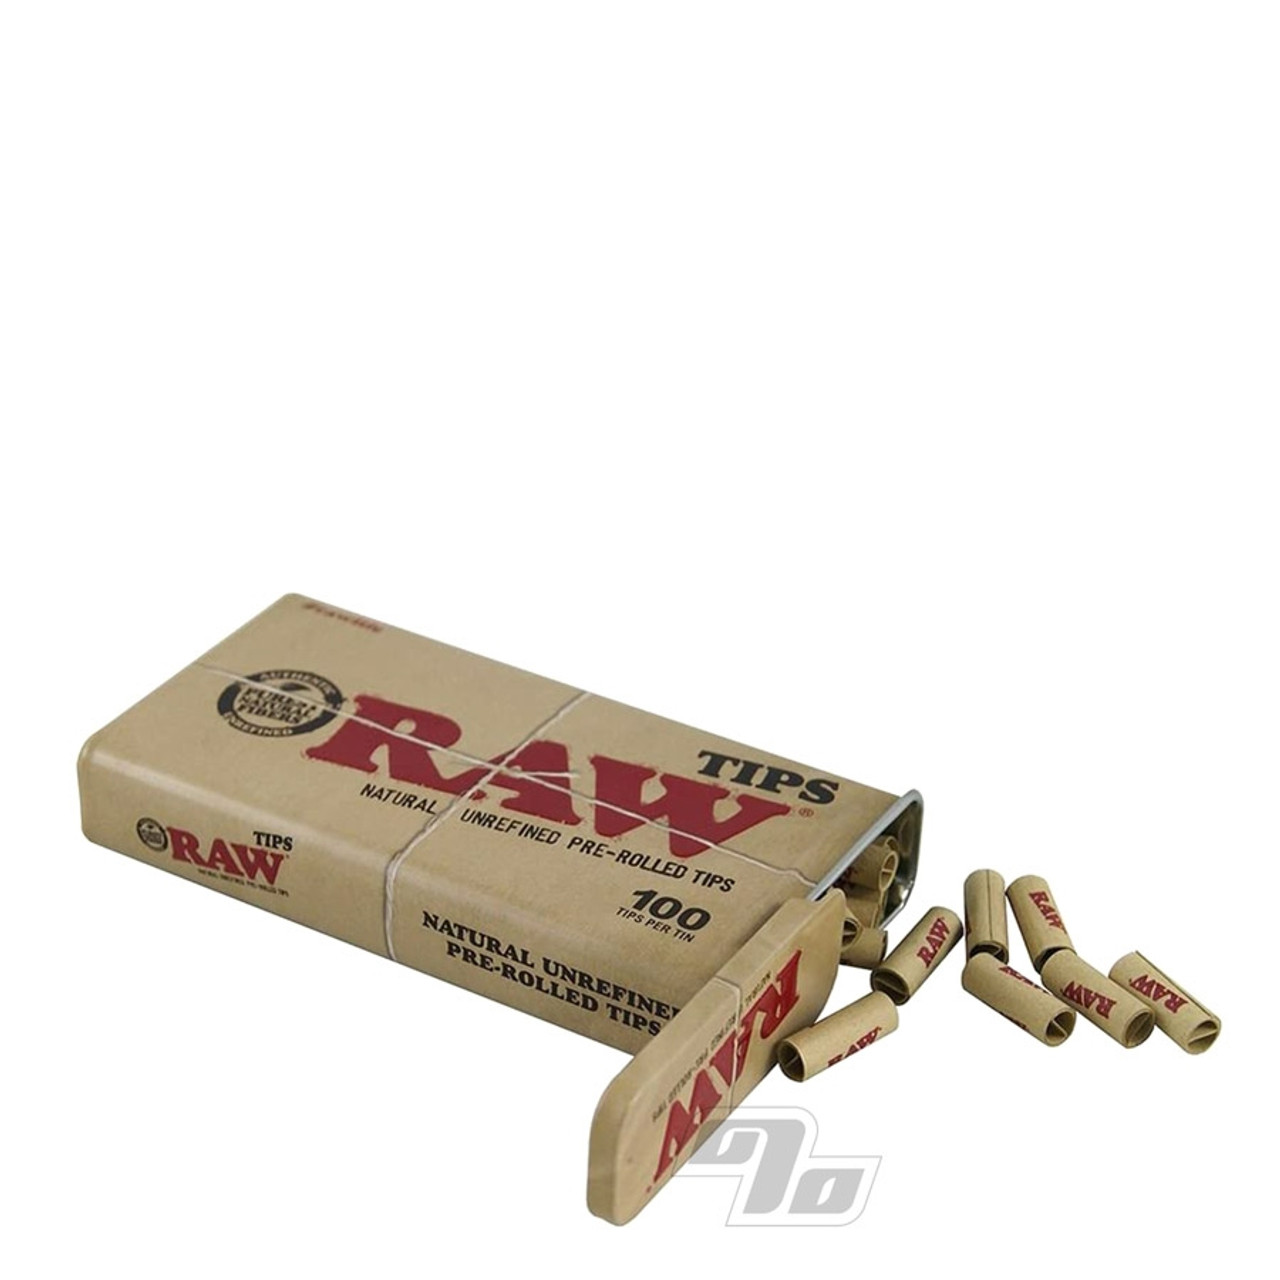 Shop RAW Pre Rolled Tips. 100 Tips per Tin